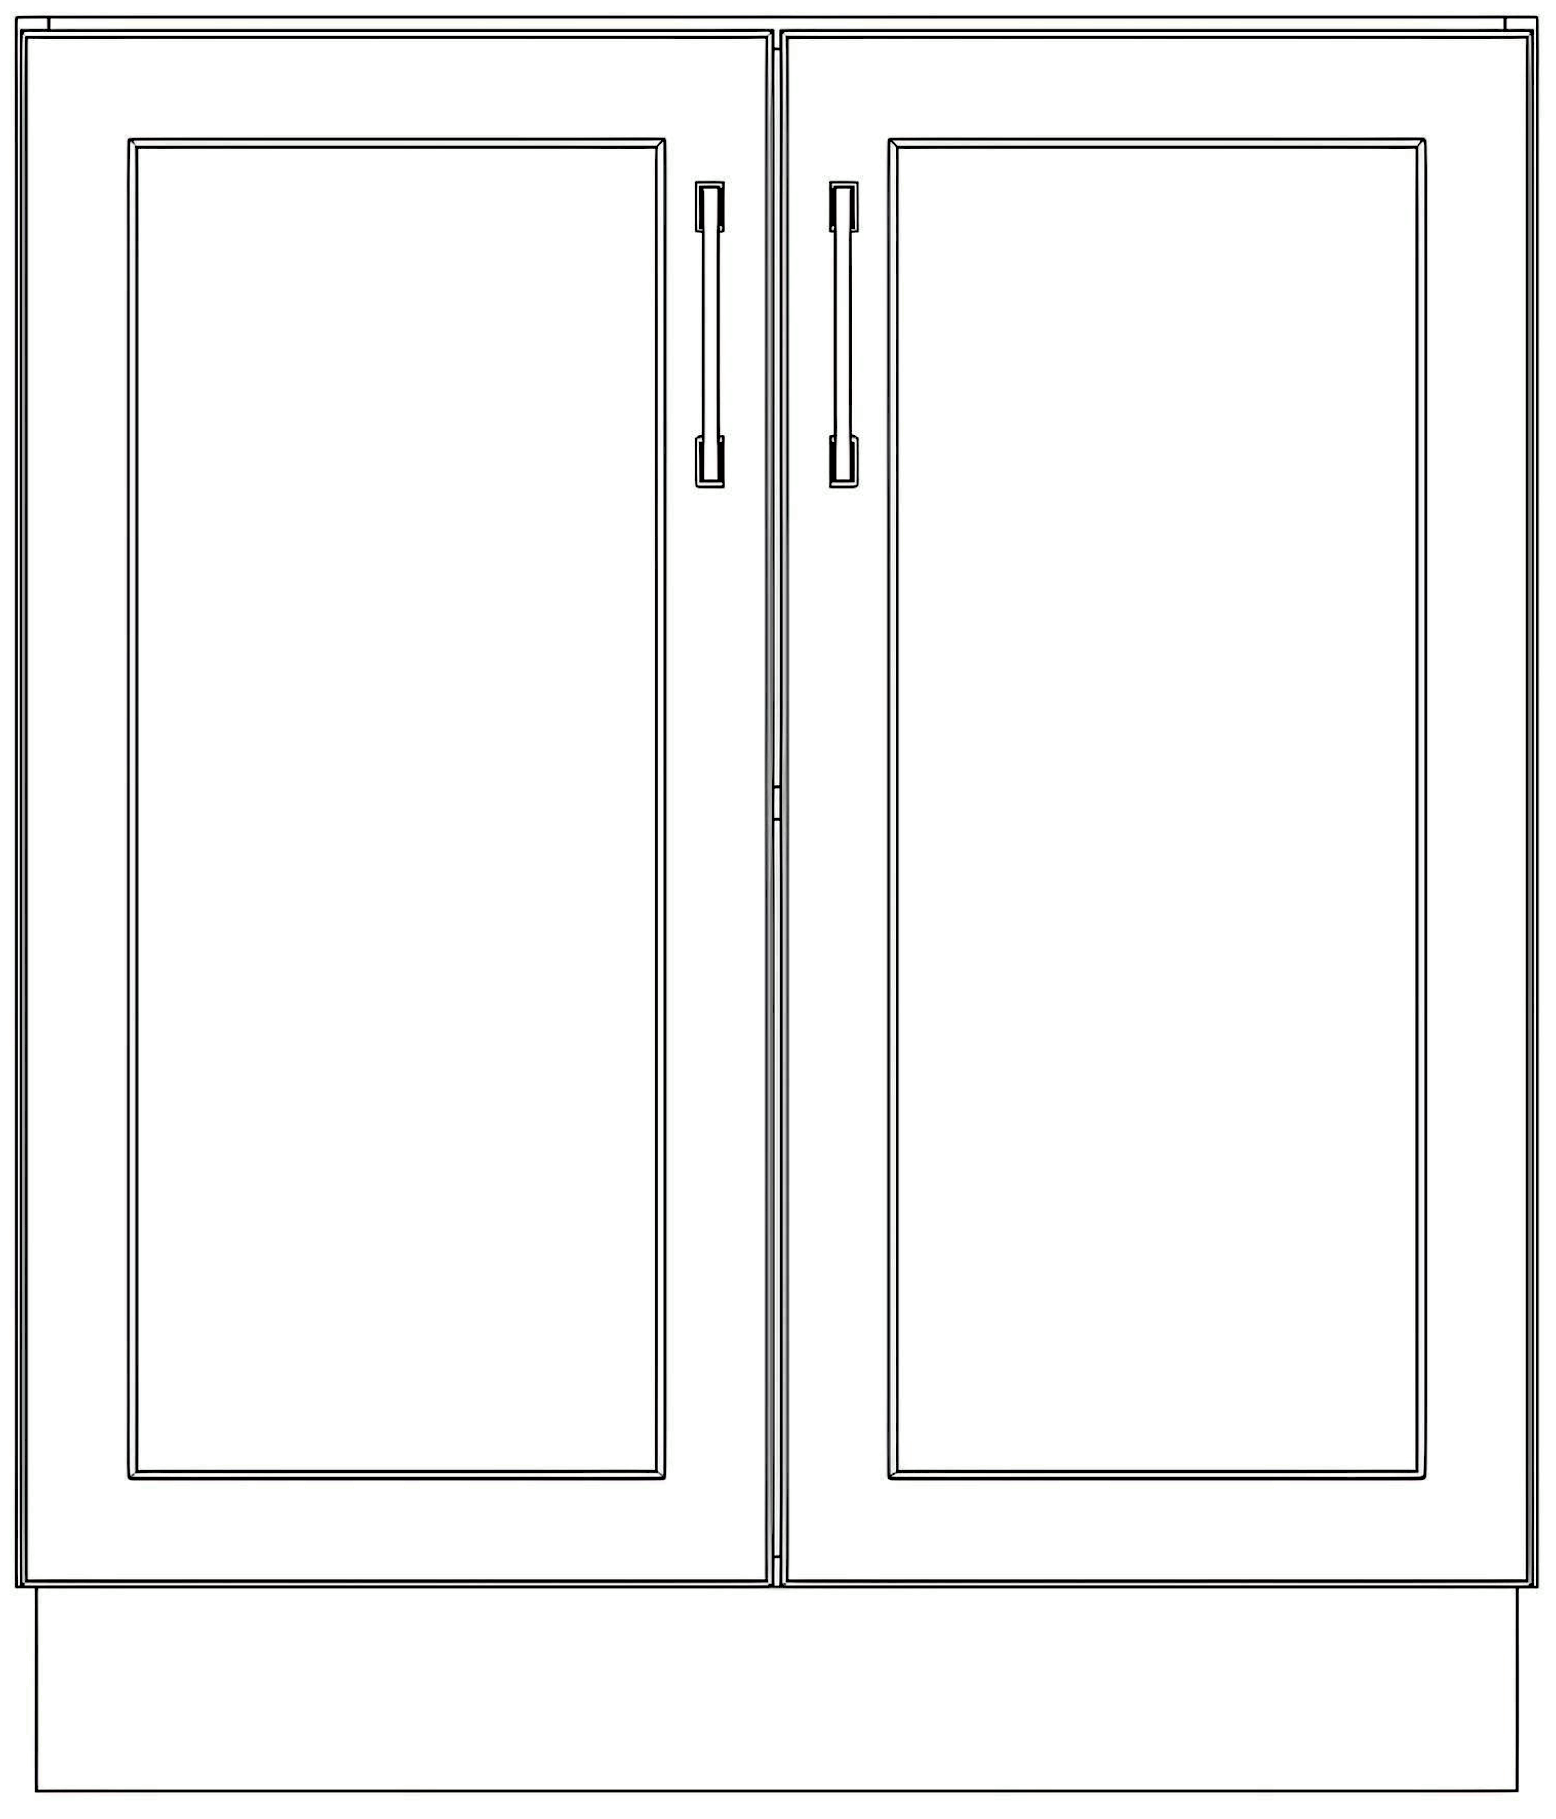 Base Cabinets - Painted Doors